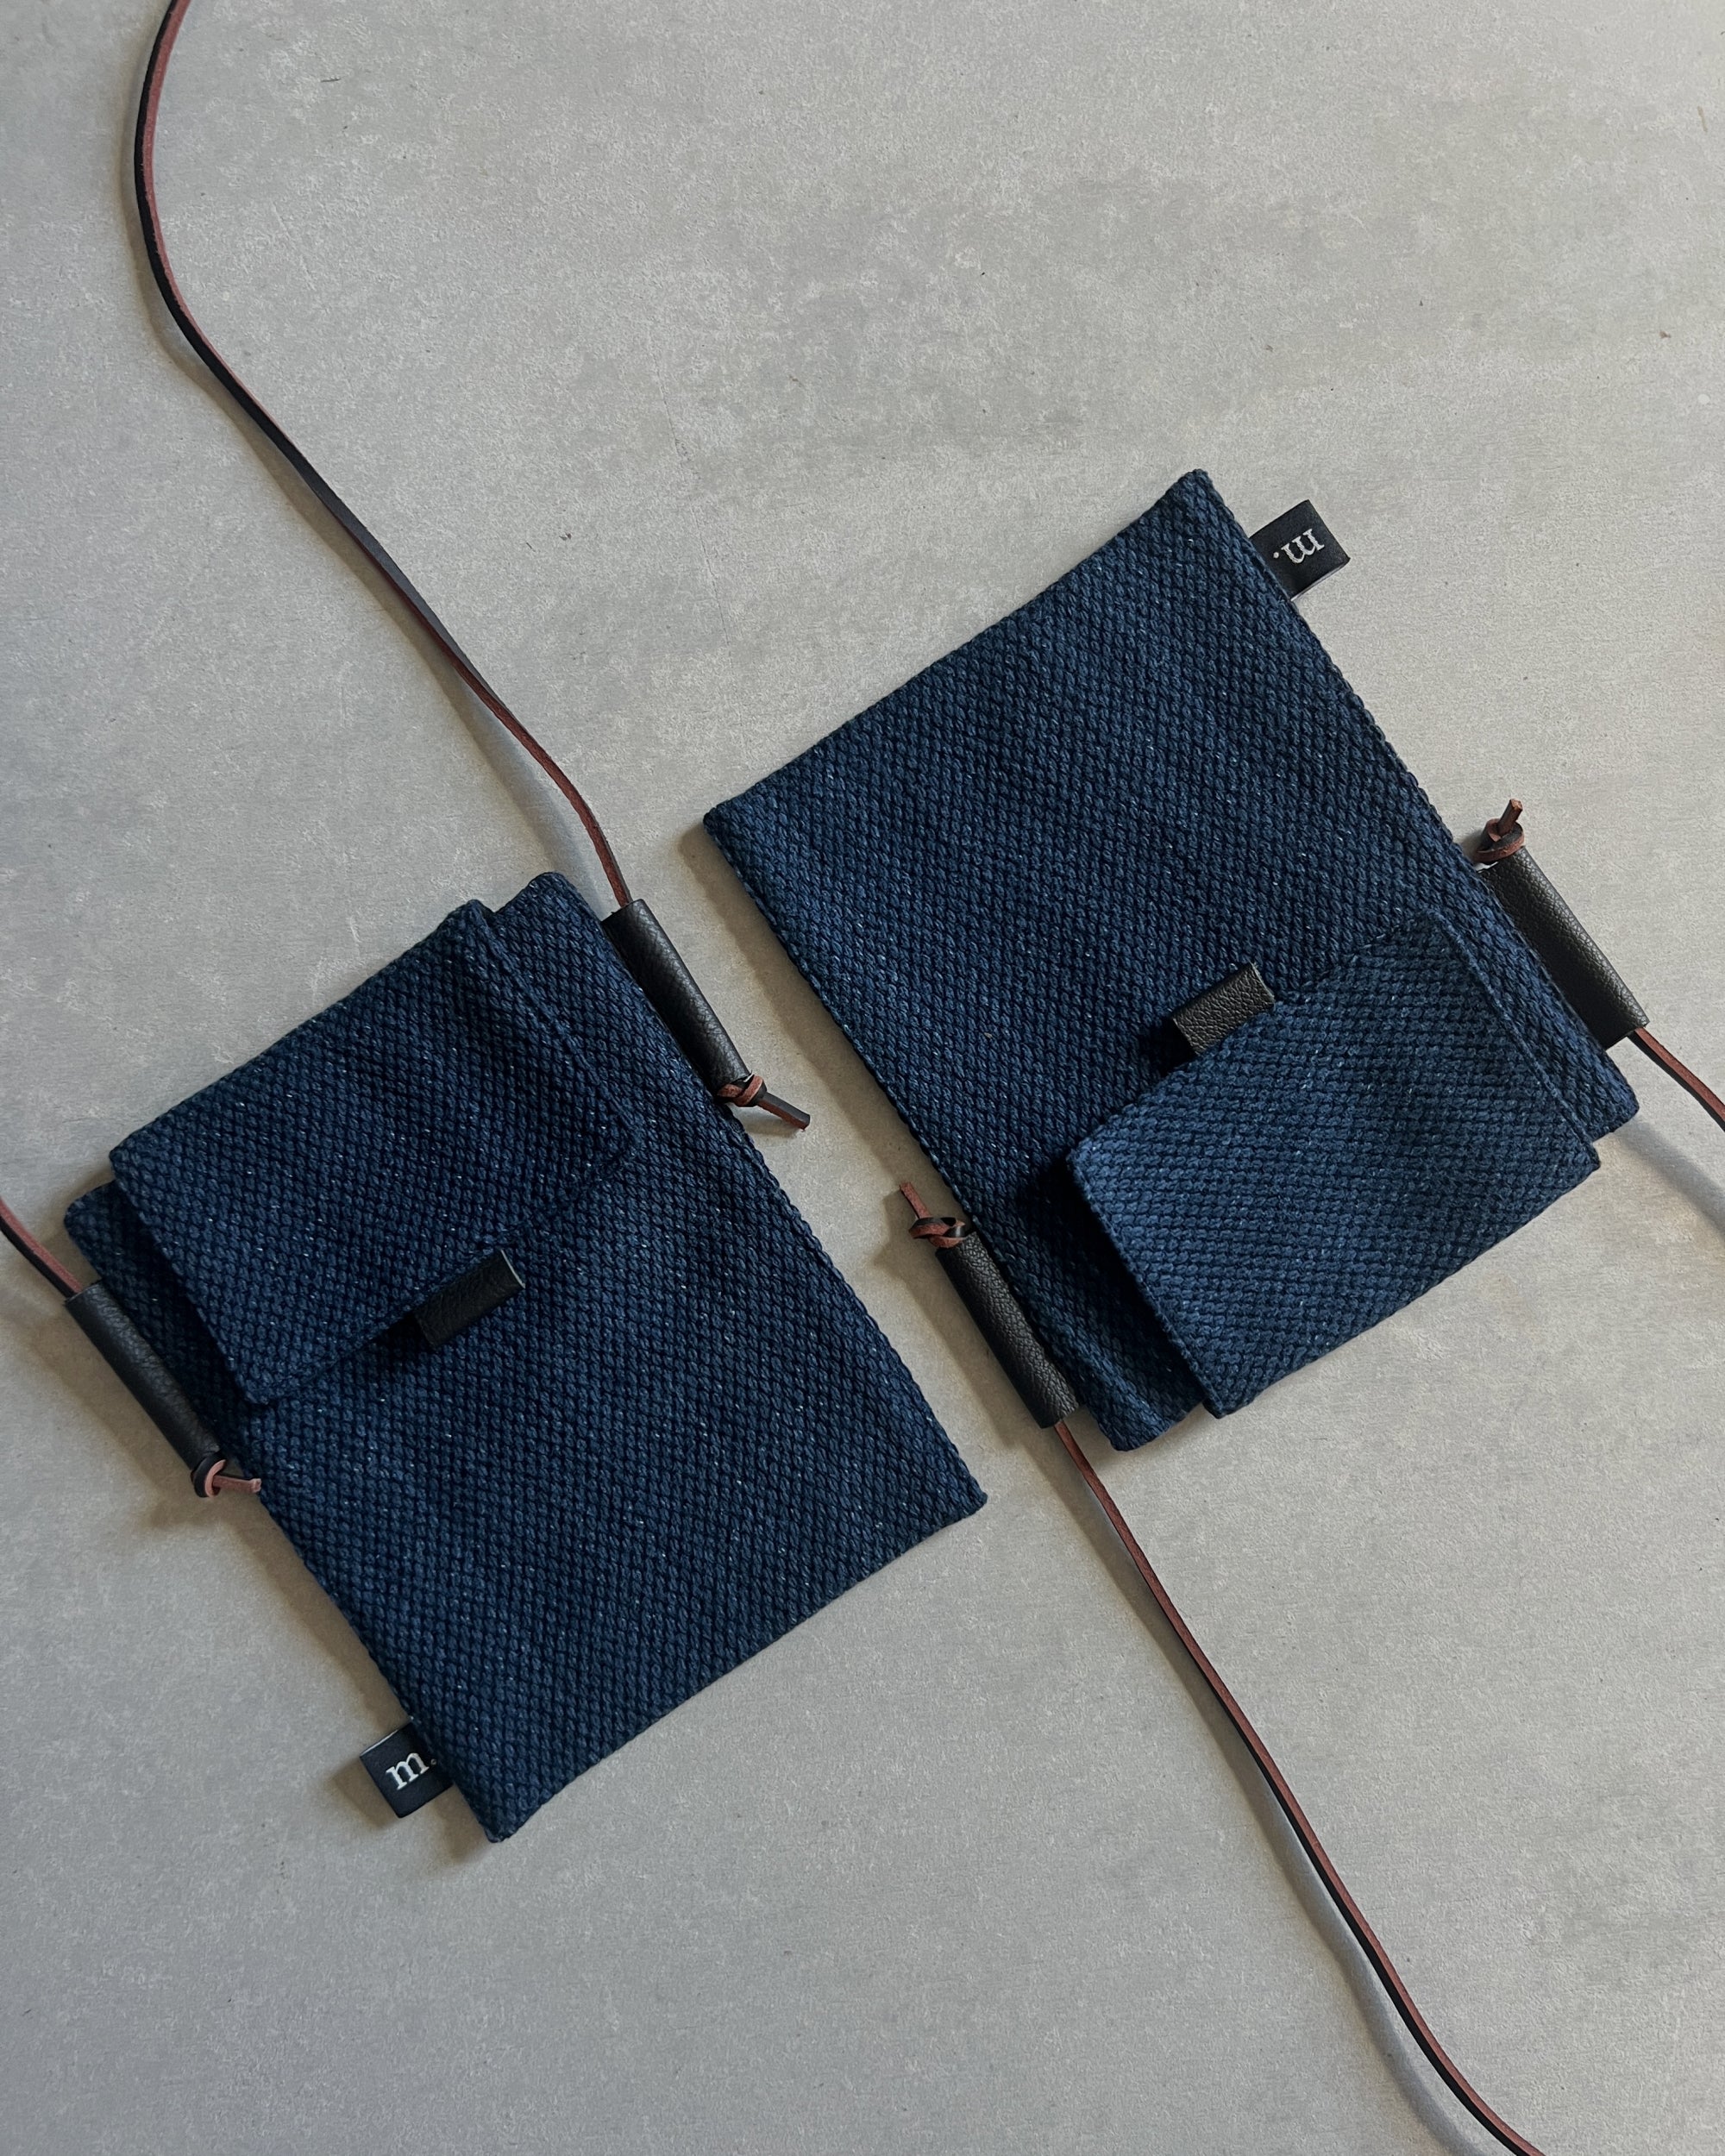 'm' for the maker : meiji pouch